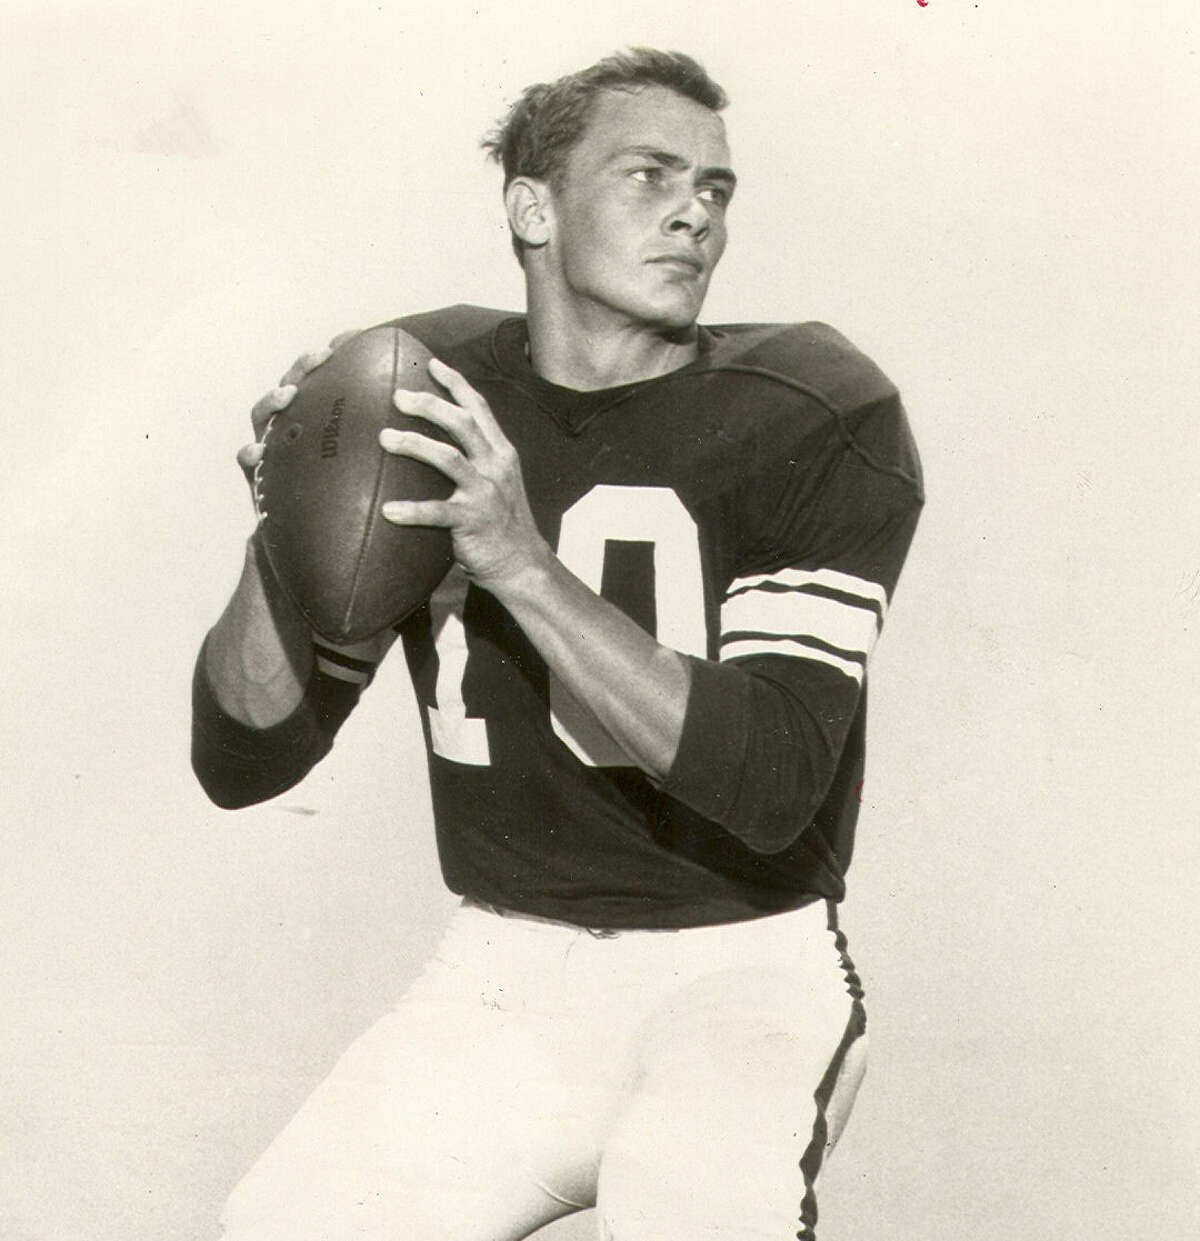 Texas A&M quarterback Edd Hargett's 70-yard pass to Bob Long secured a win over Texas and the 1967 SWC title.